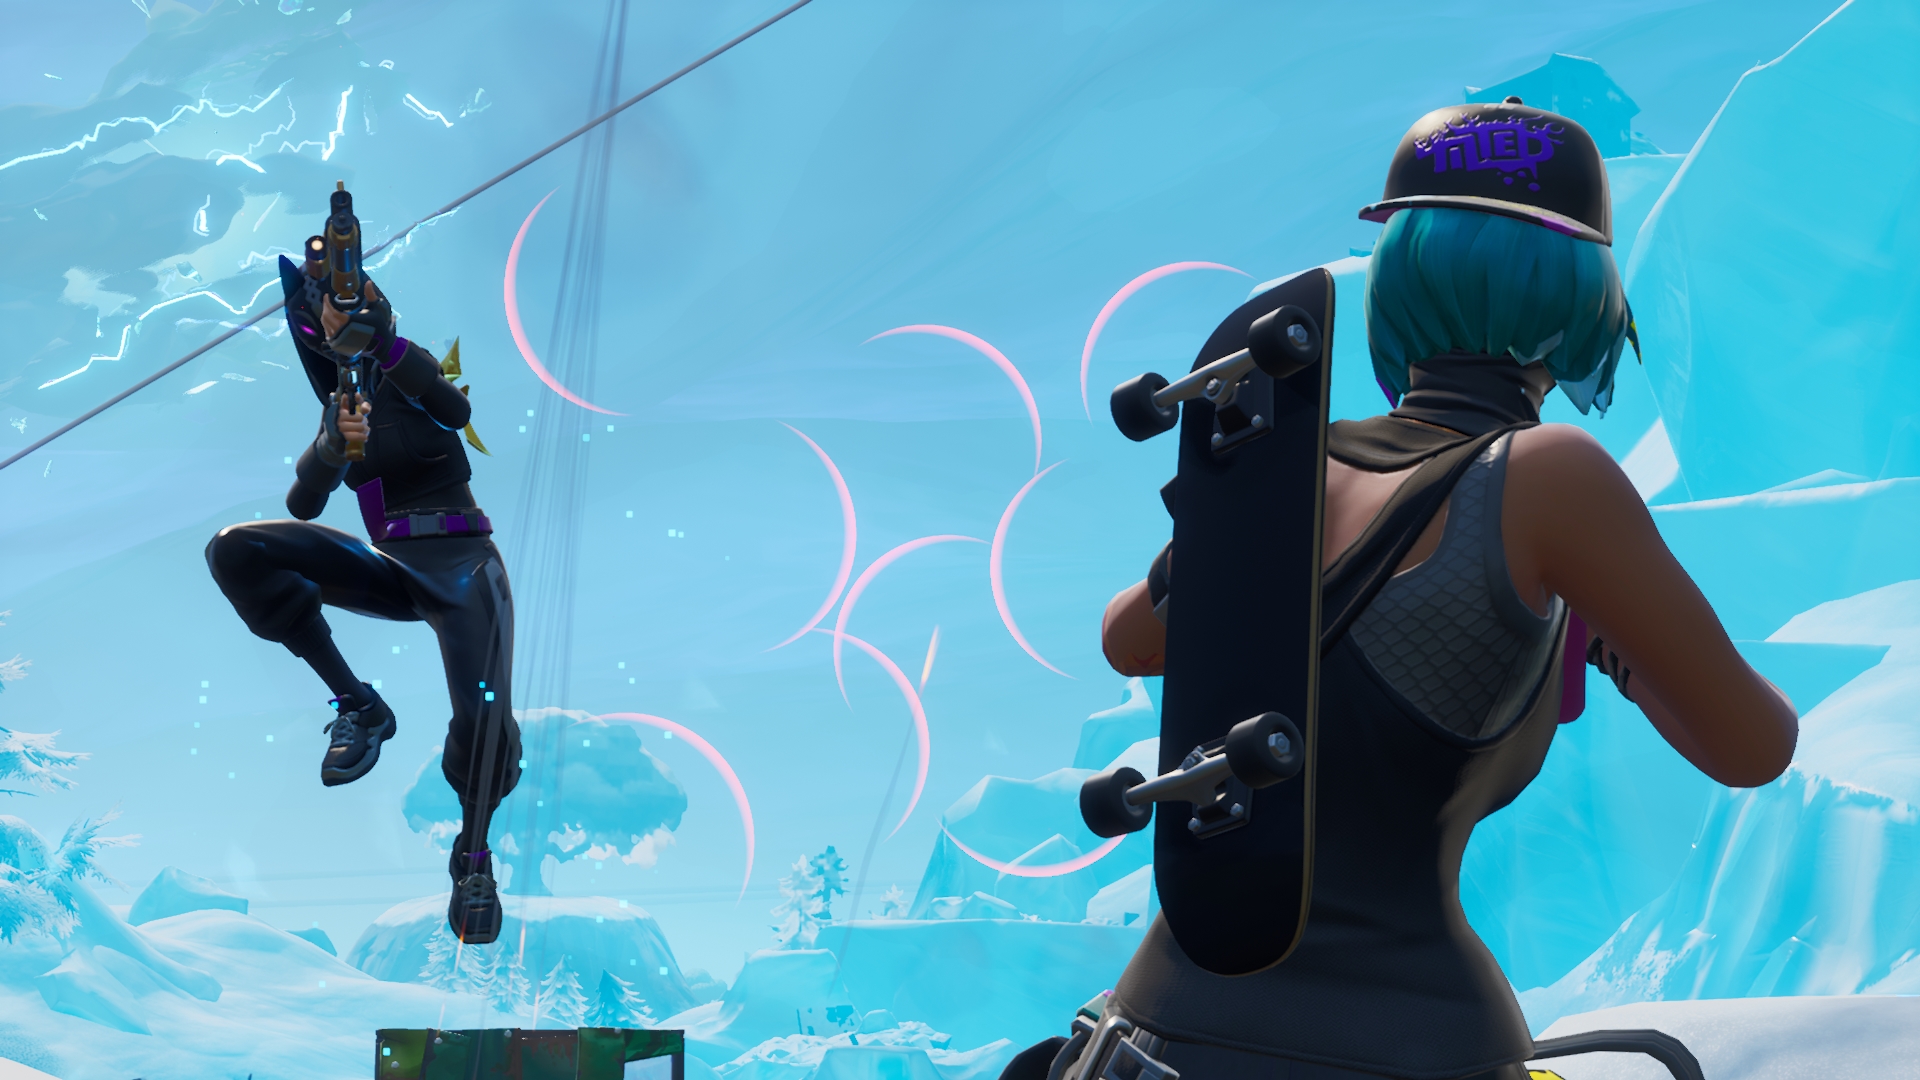 Fortnite S Battle With Apple And Google Could Have An Impact On News Publishers Too Nieman Journalism Lab